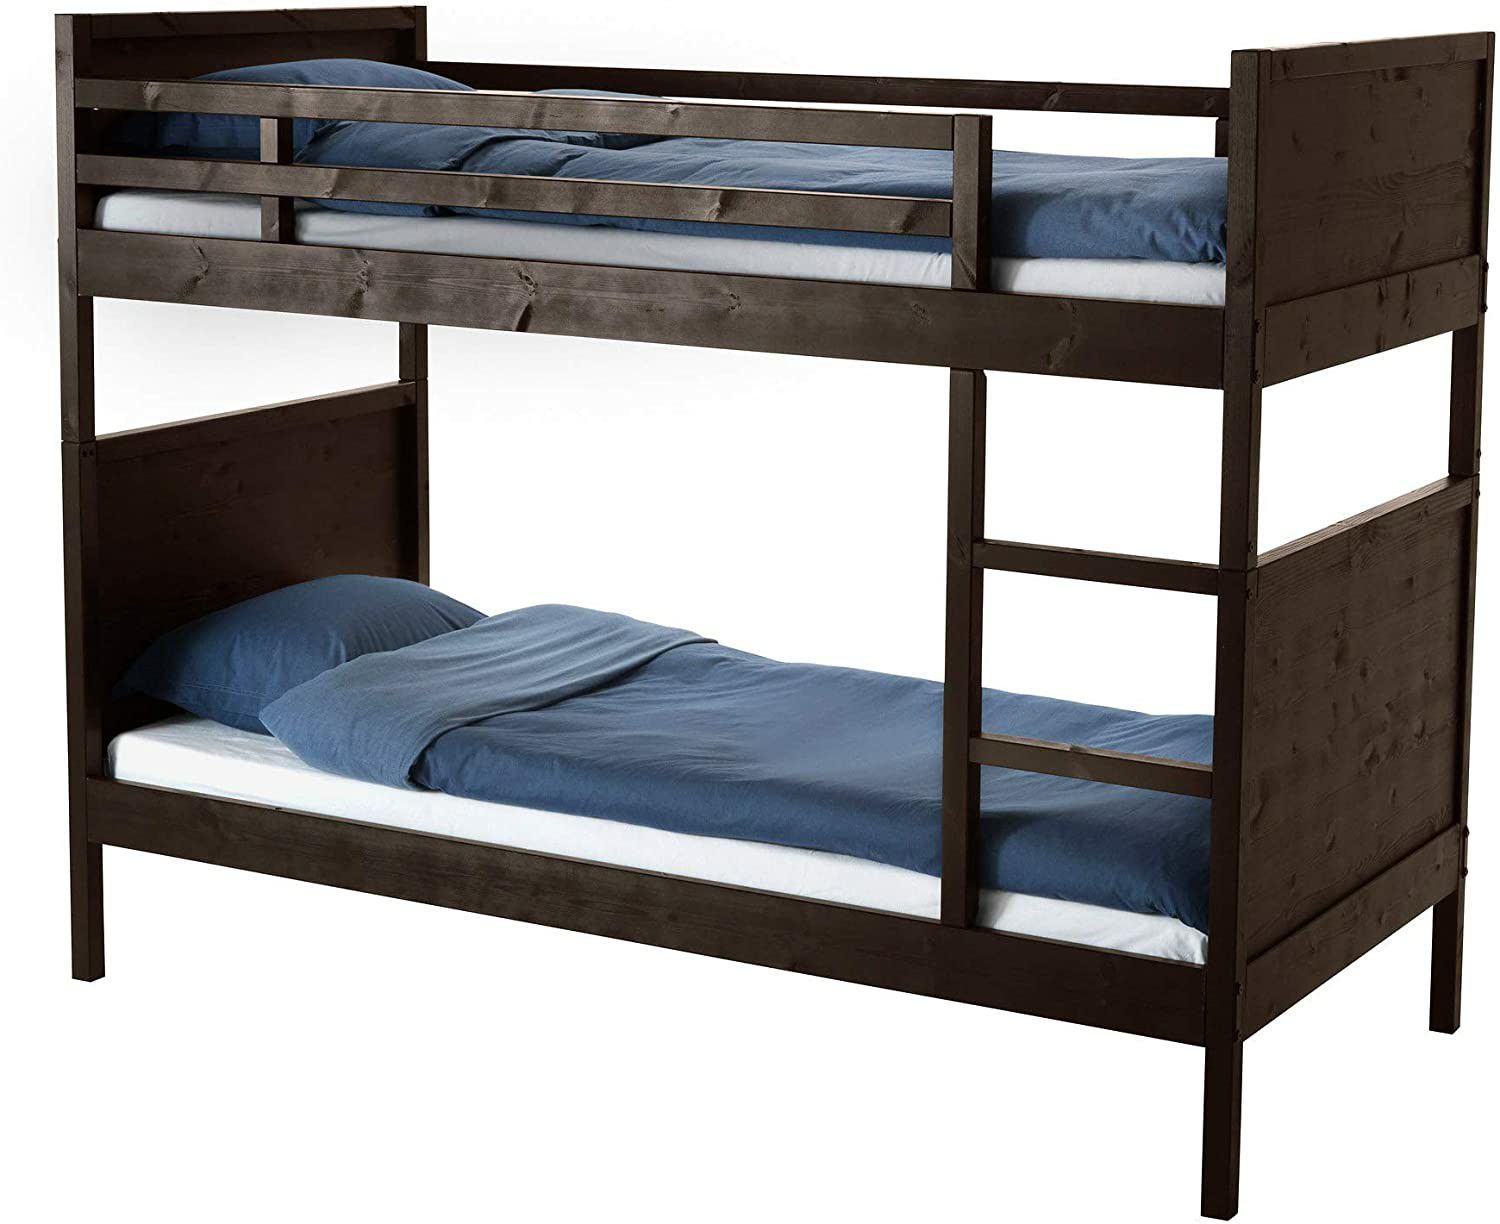 Free! Pickup before 10/30. Black-Brown Ikea bunk bed with Mattress